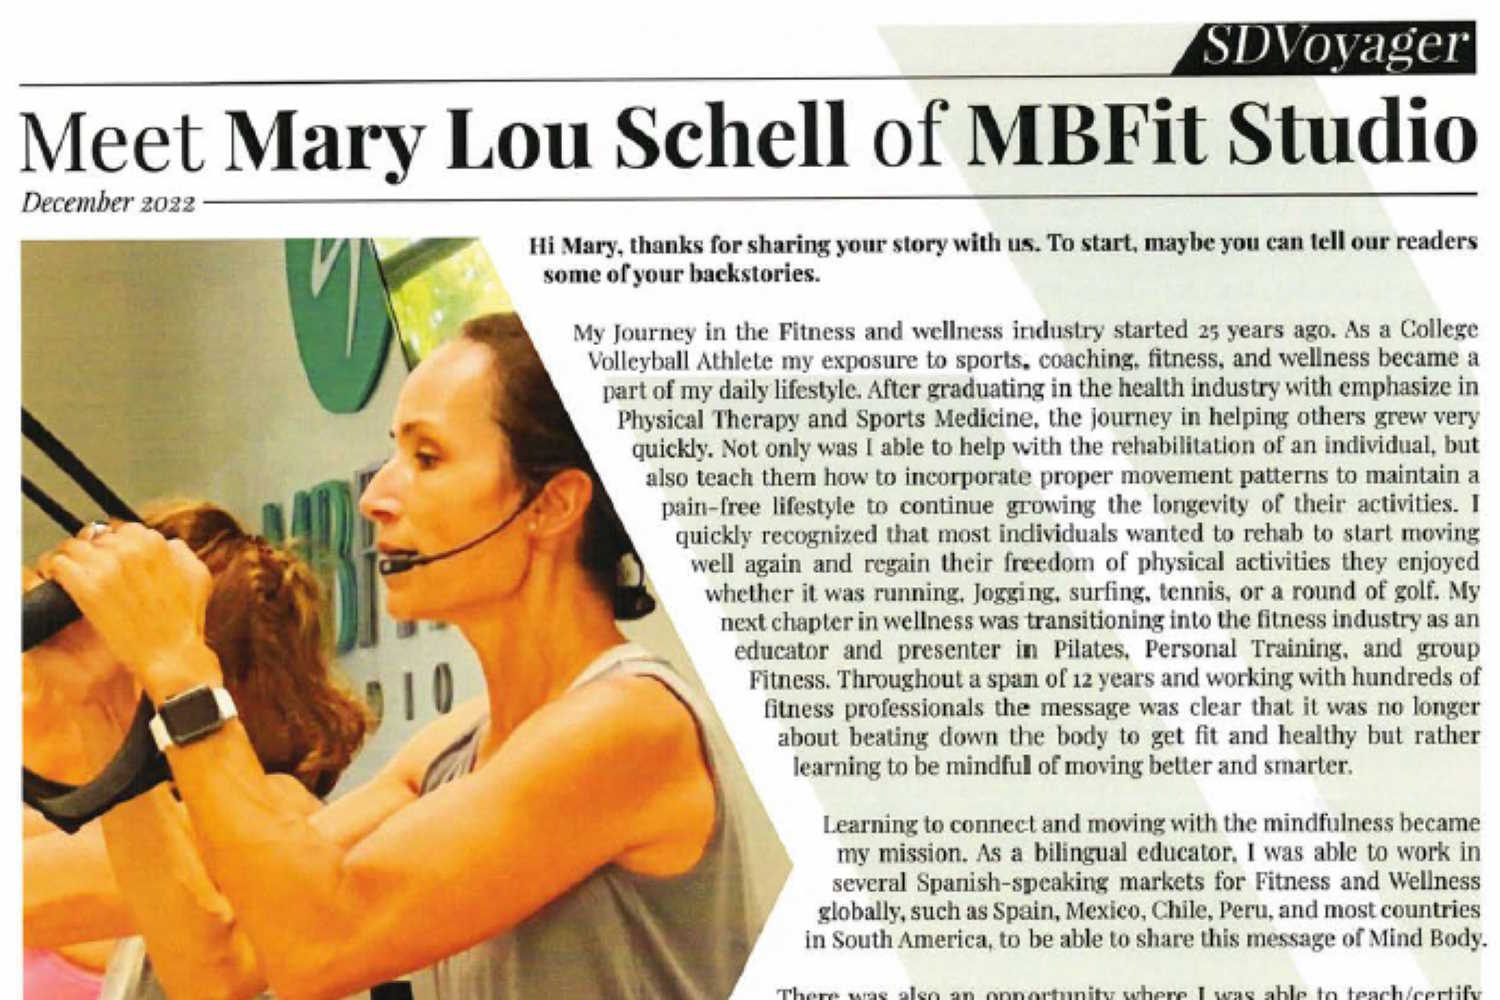 SDVoyager article featuring Mary Lou Schell and MB Fit Studio